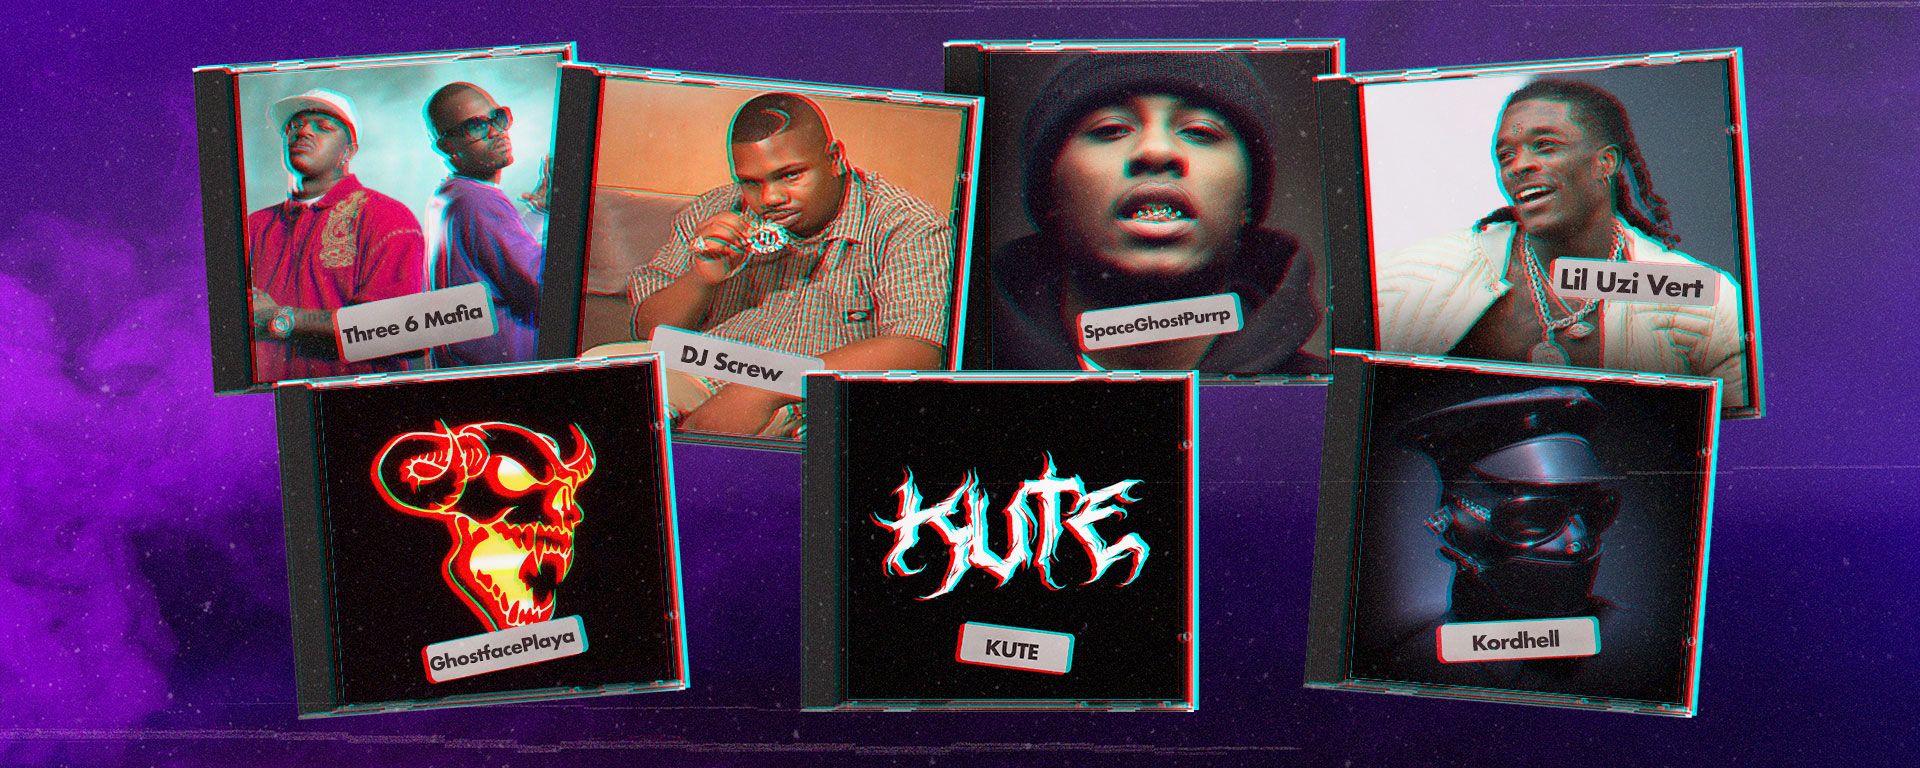 Images of popular phonk artists.